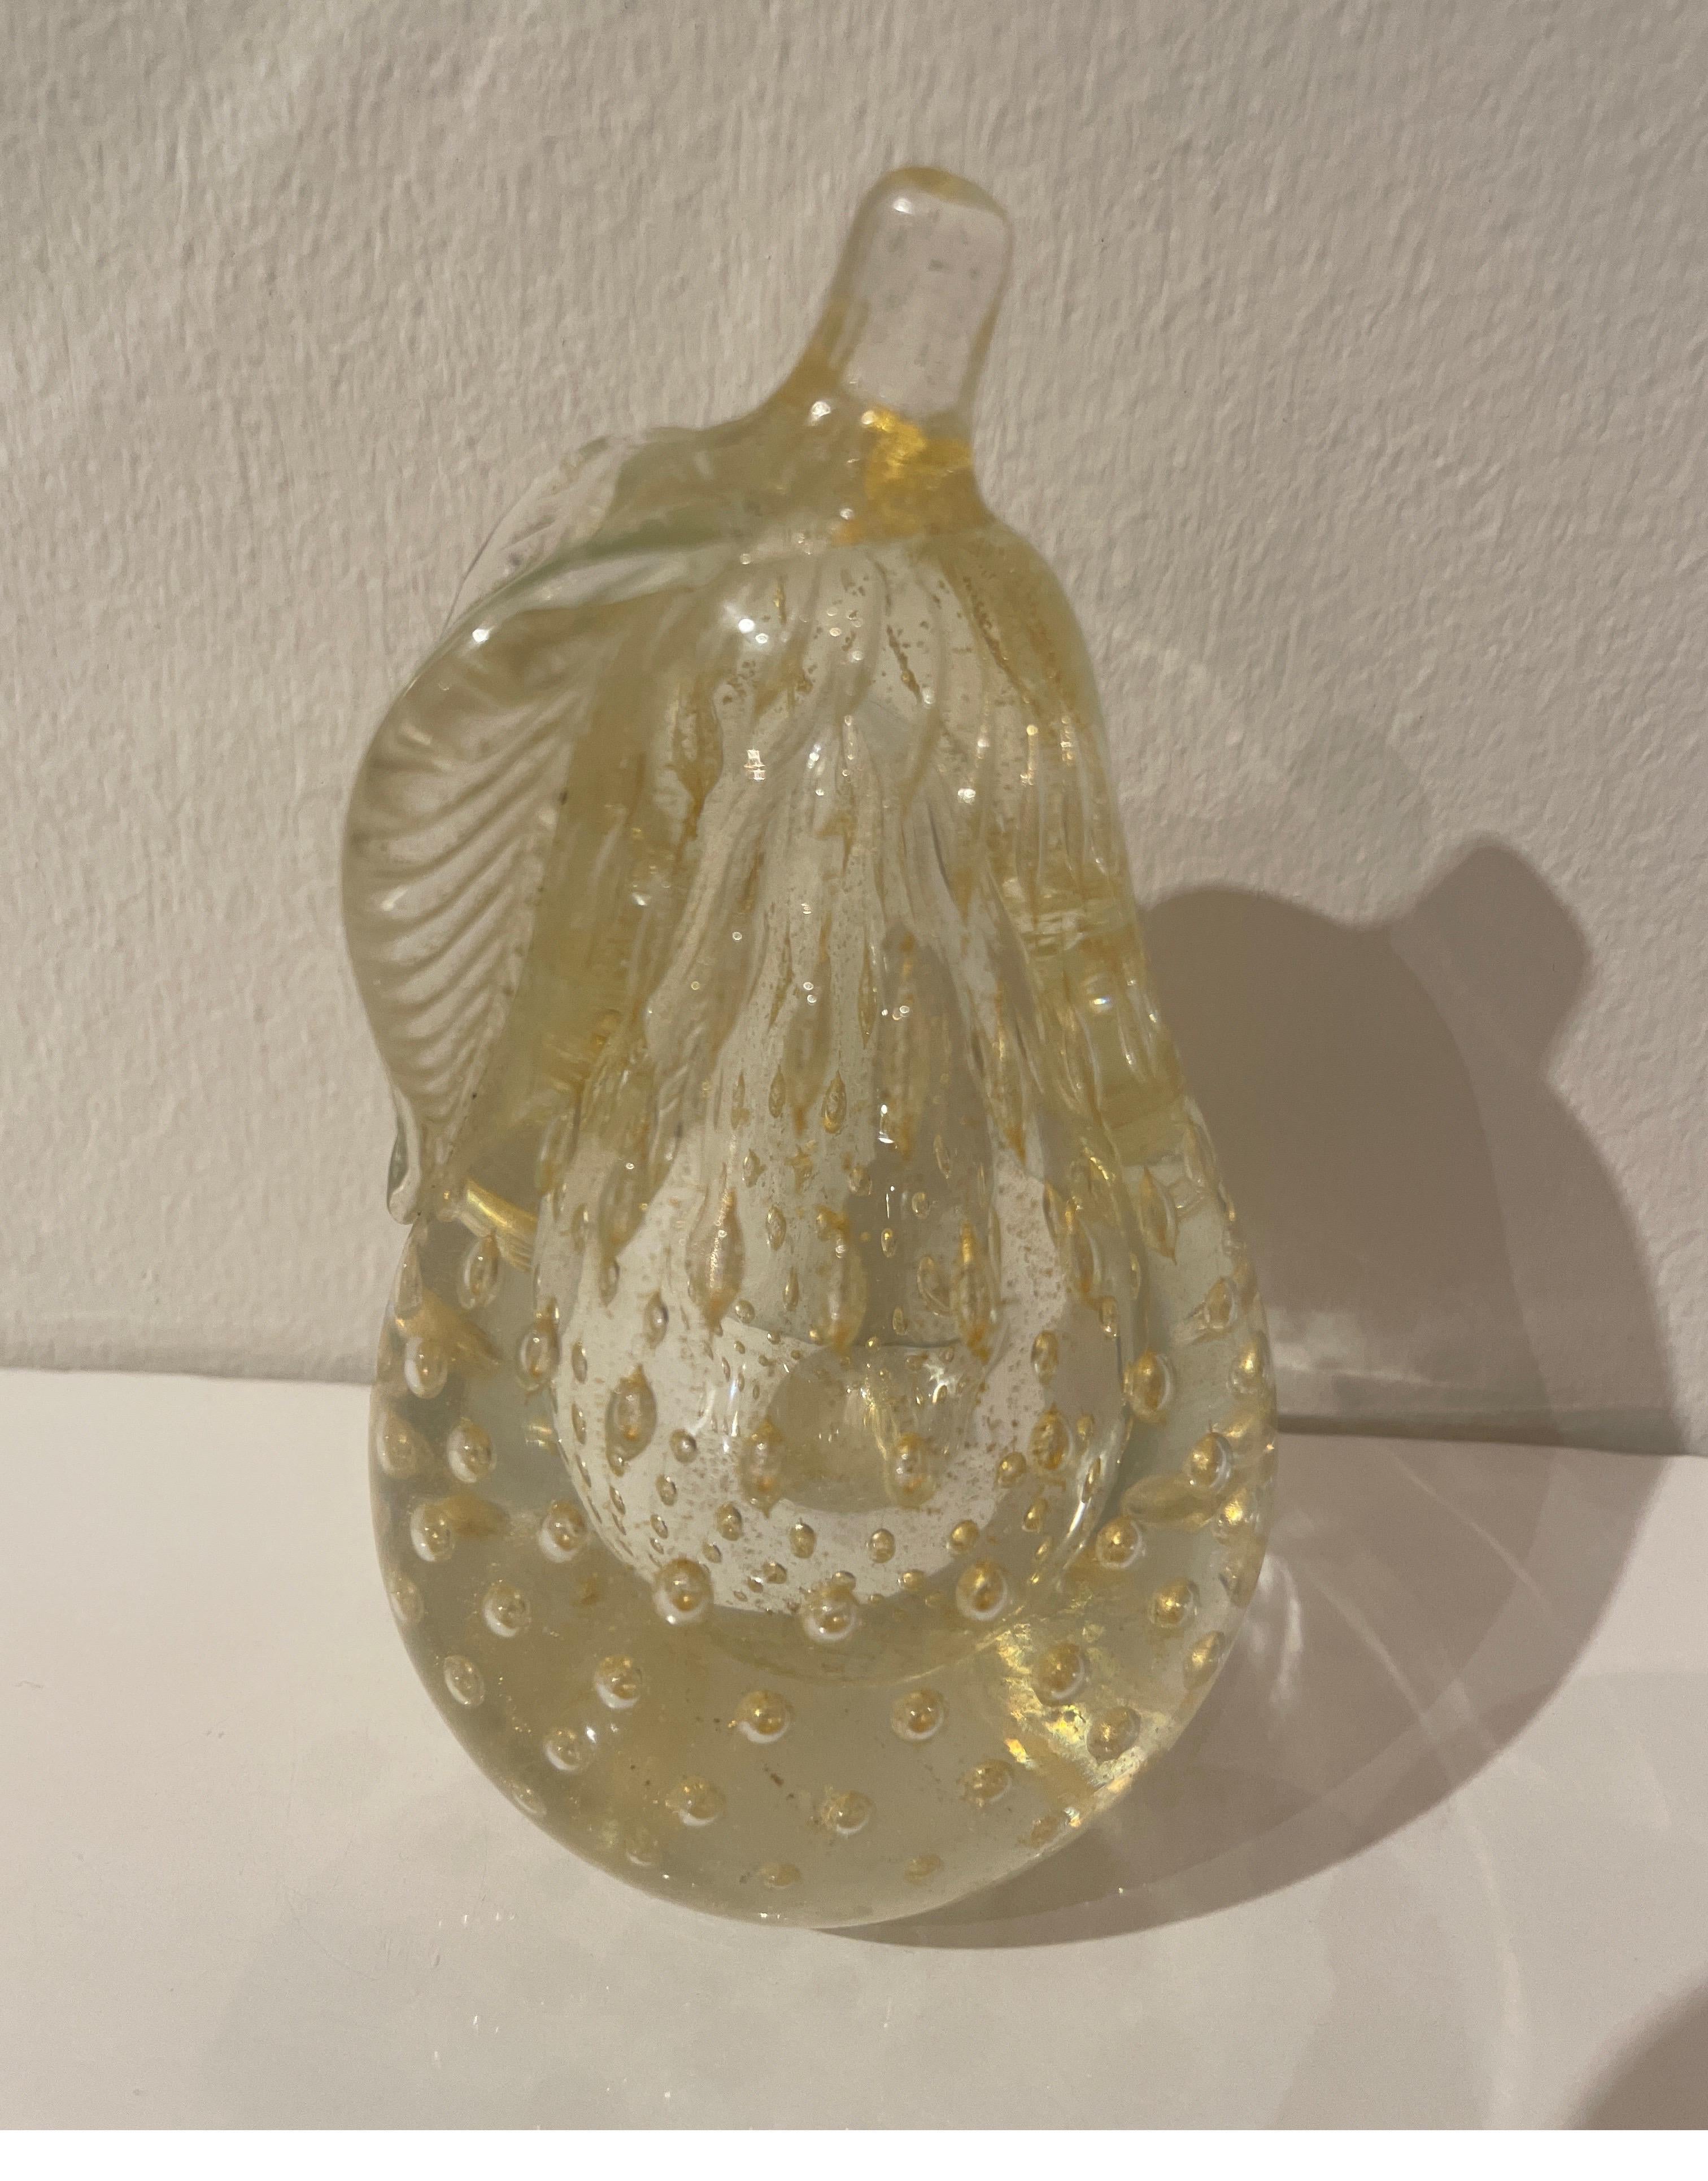 Charming gold speckled Murano glass pear paperweight. Striking design of controlled bubbles throughout.